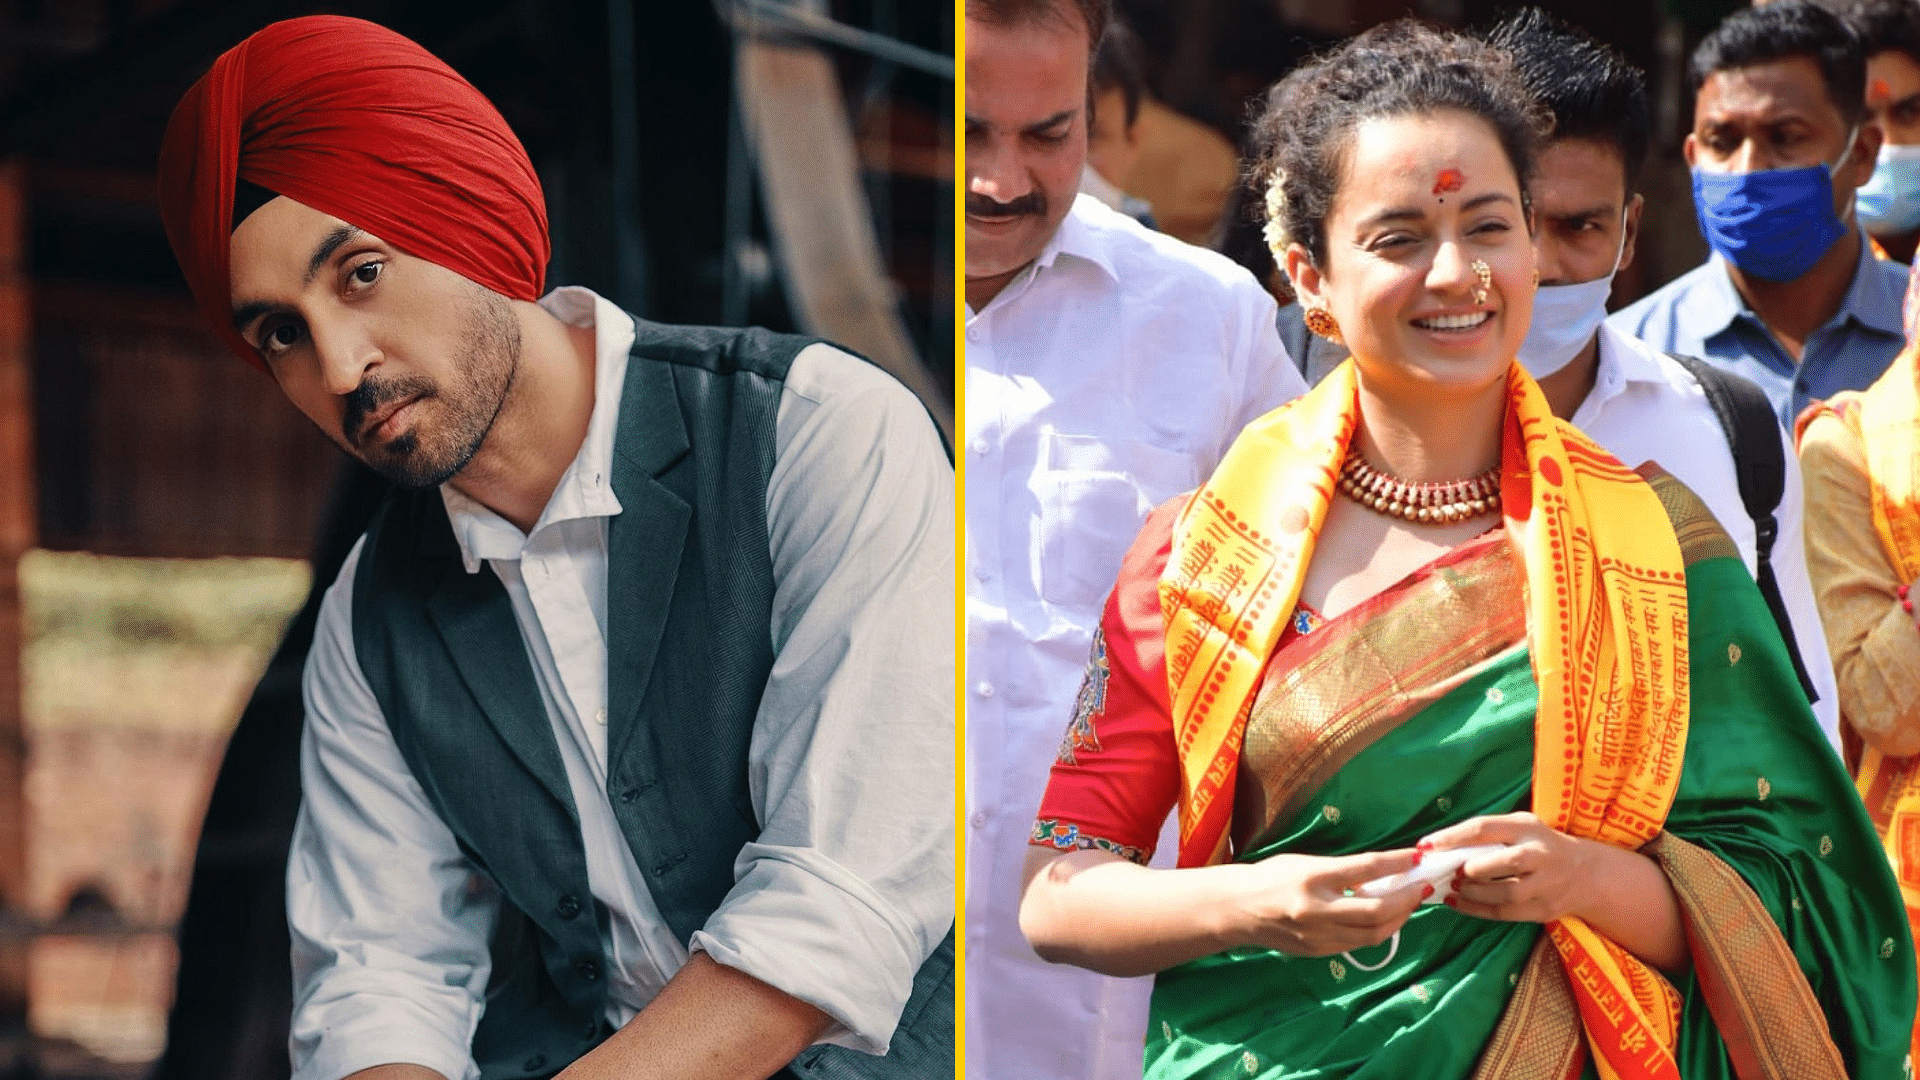 Actors Diljit Dosanjh and Kangana Ranaut have been engaged in a verbal battle on Twitter.